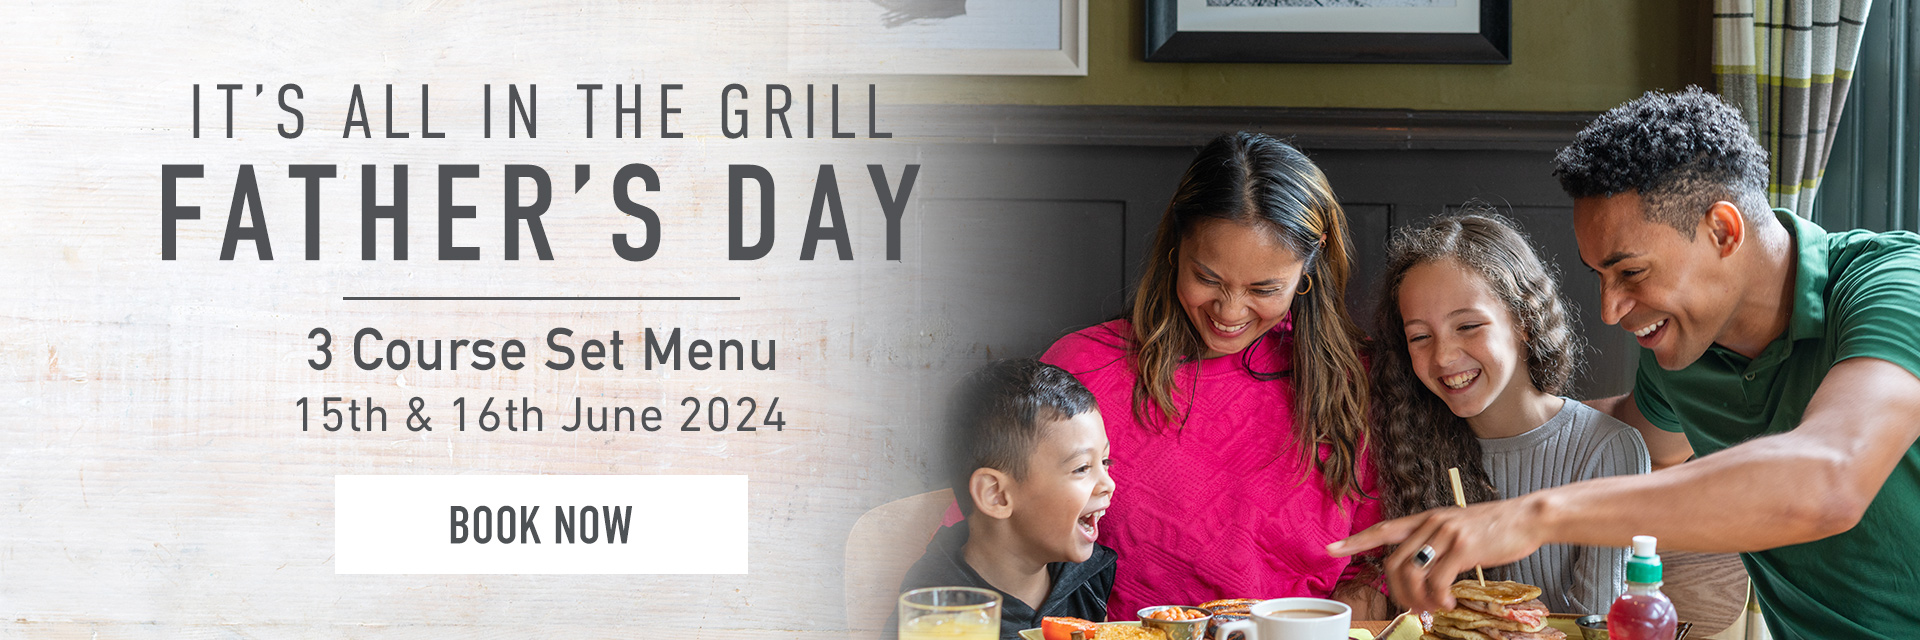 Father’s Day at Harvester Quayside MediaCityUK